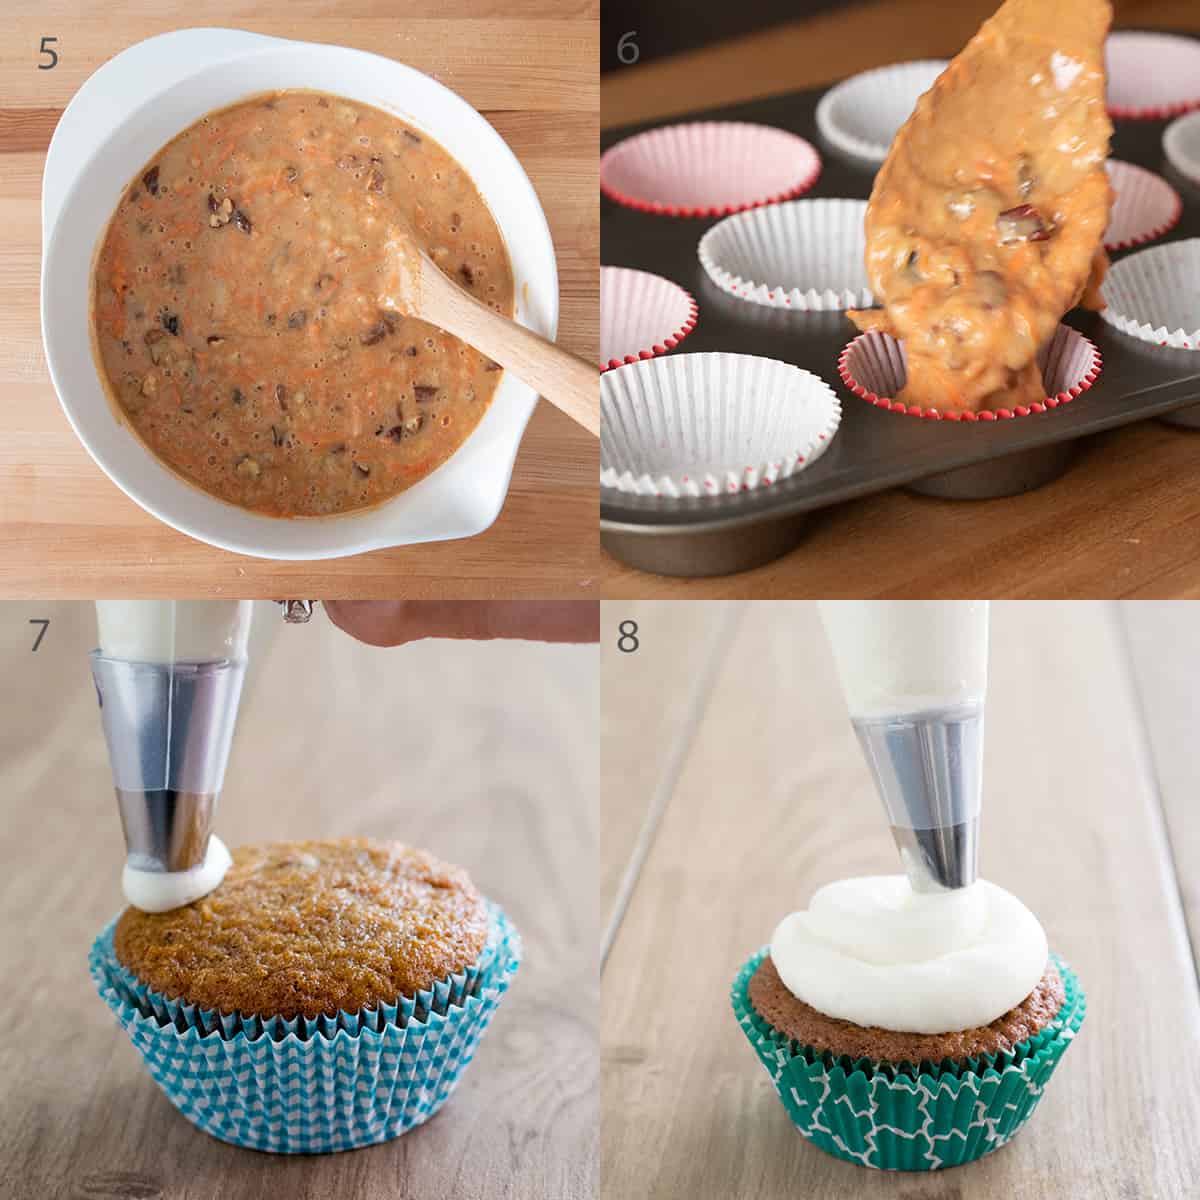 Steps to make carrot cake cupcakes including putting batter in pan and frosting the cupcakes.